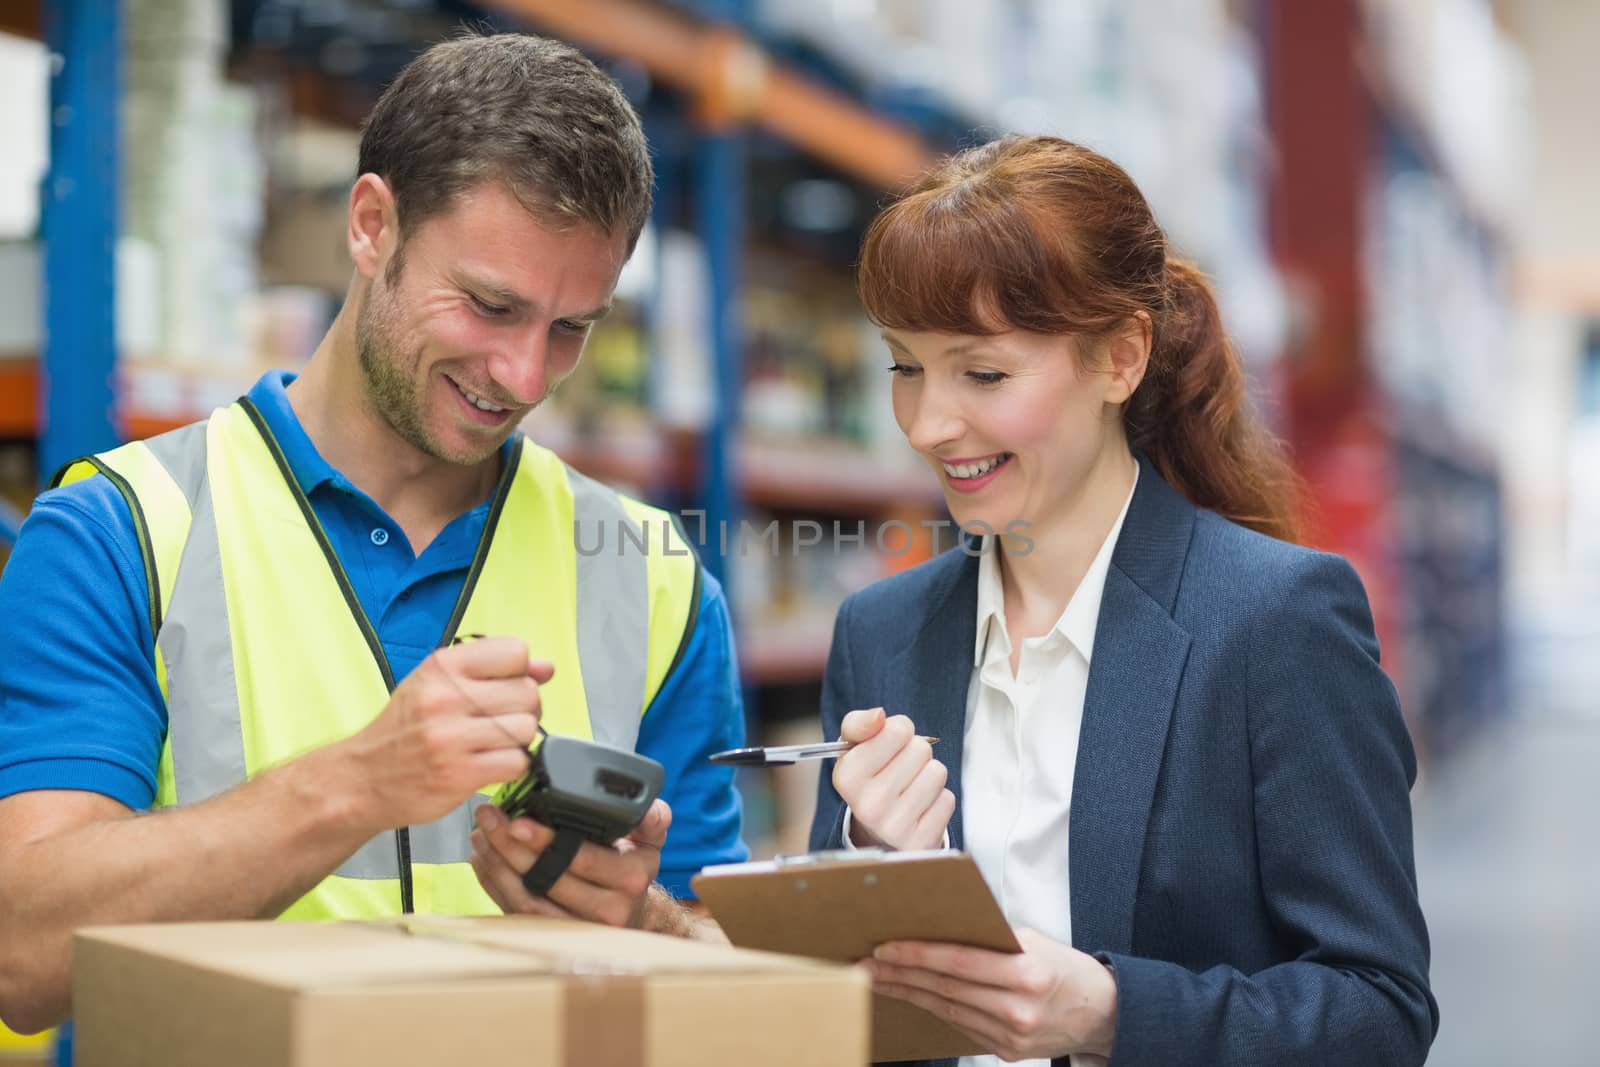 Worker and manager scanning package in warehouse by Wavebreakmedia